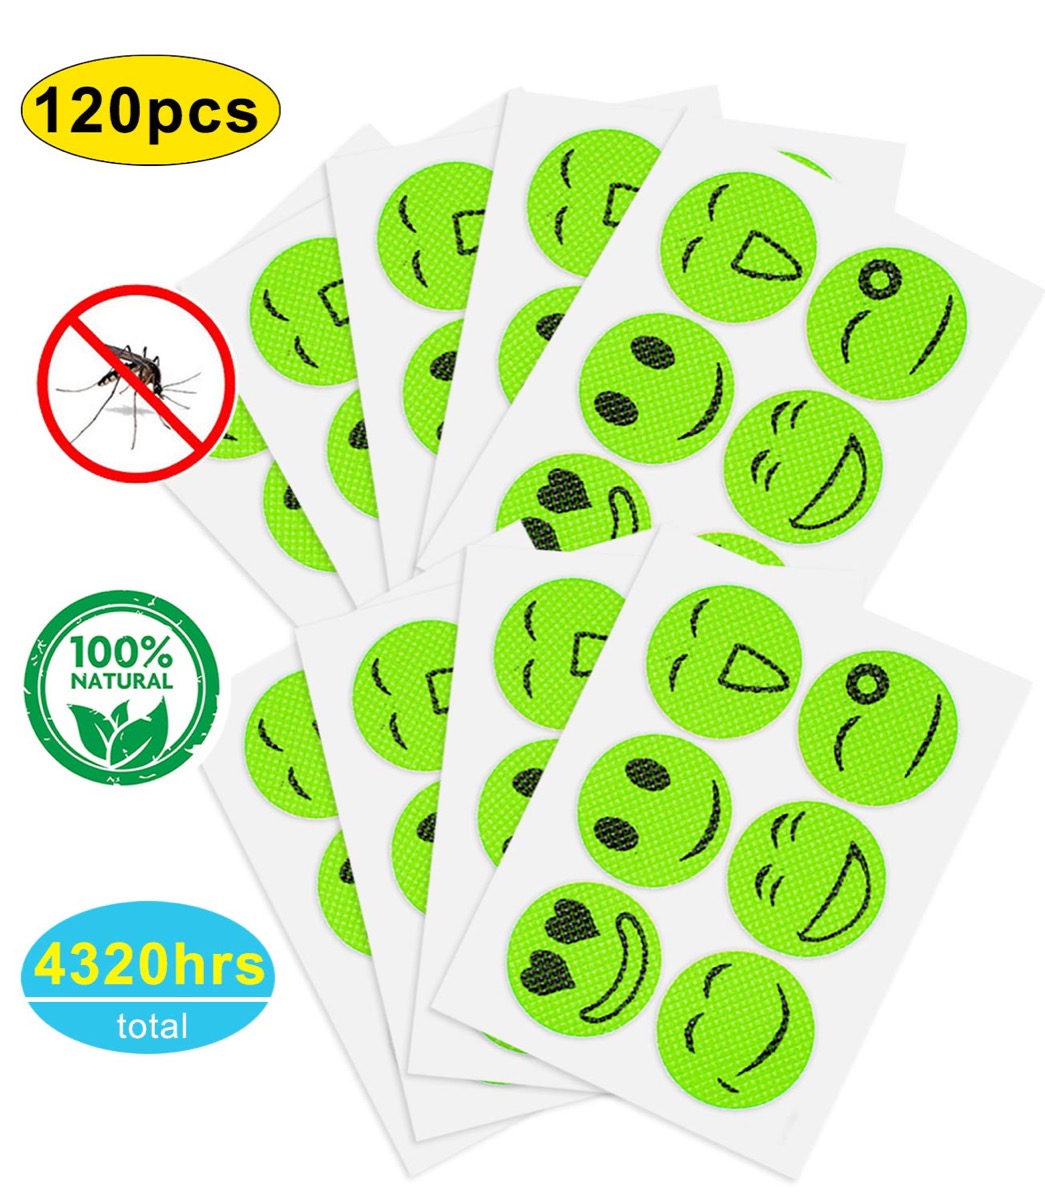 mosquito repelling stickers, bug protection